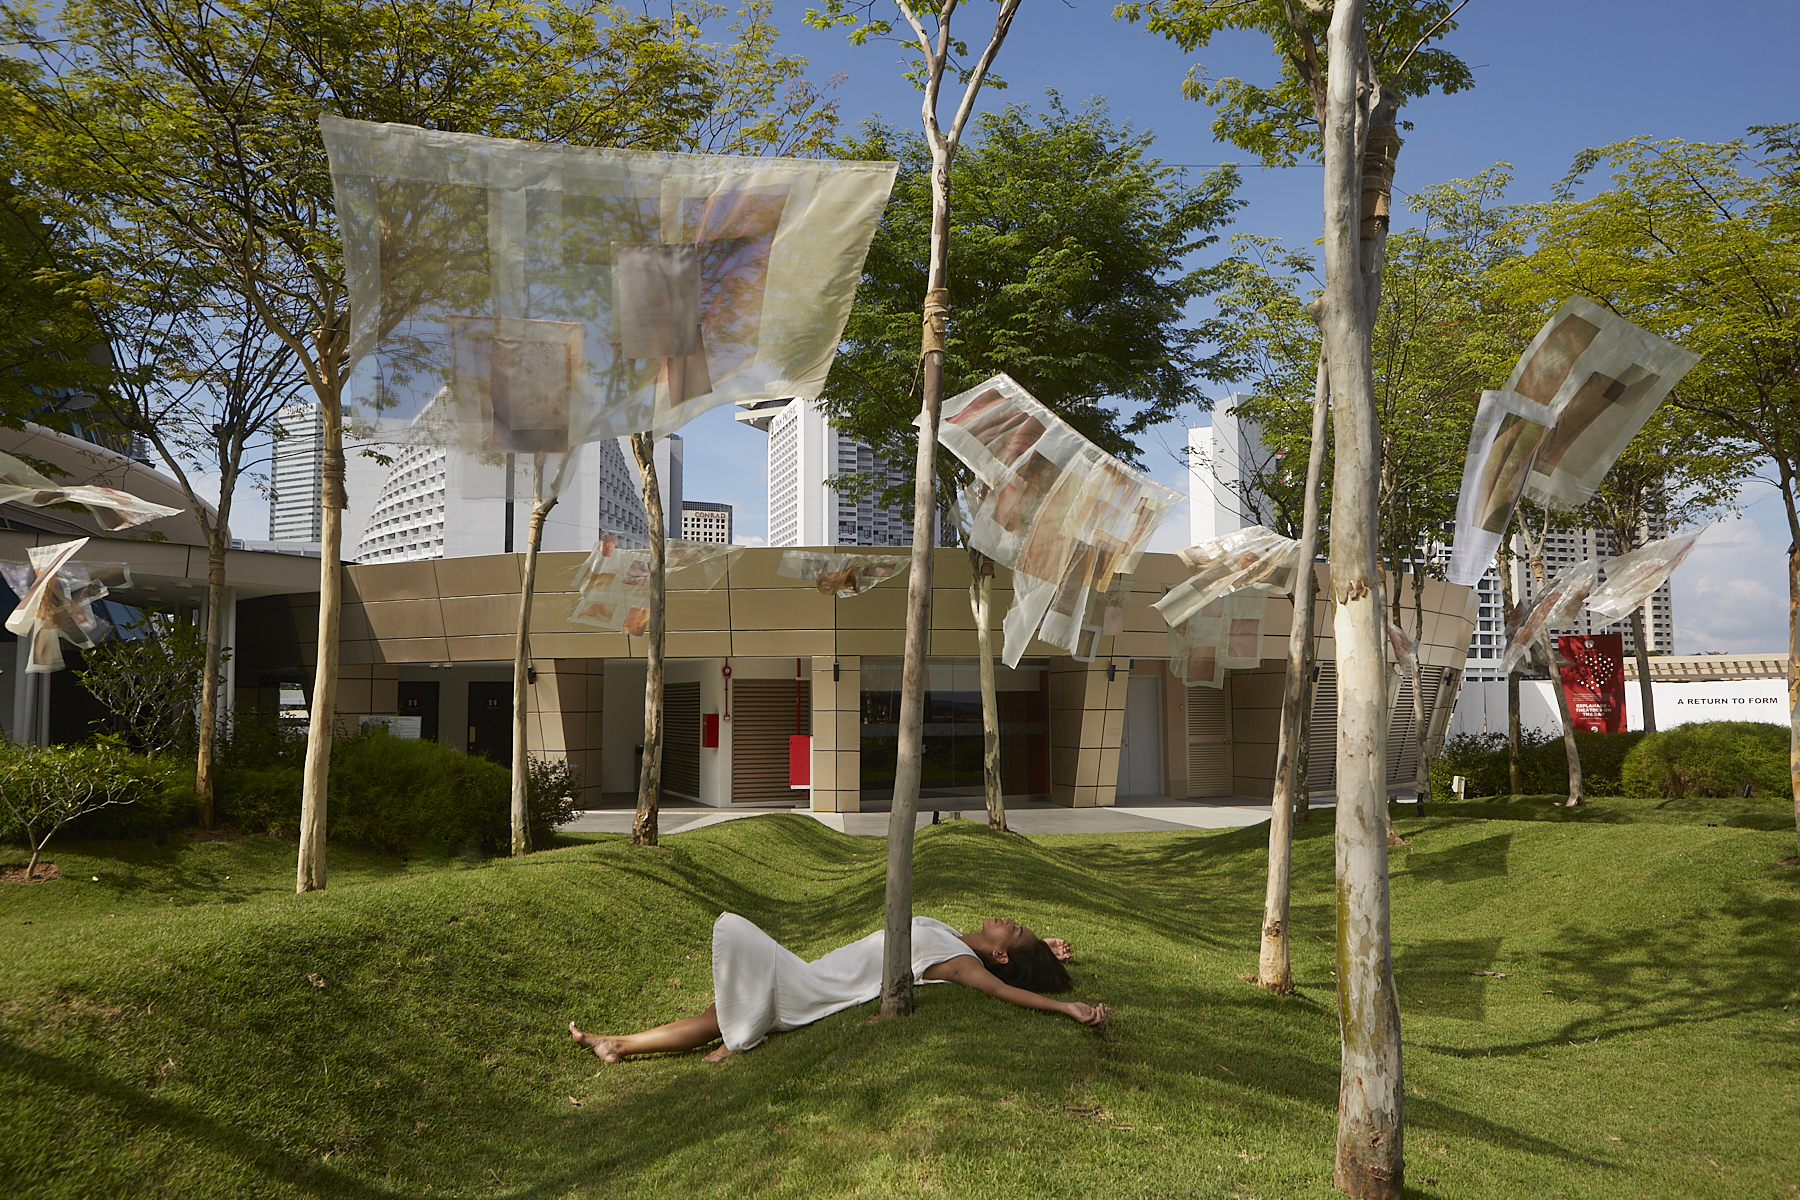 A view of an Asian women in a white dress, laying down on the grass below the trees and under the see through fabric installation being blown by the breeze